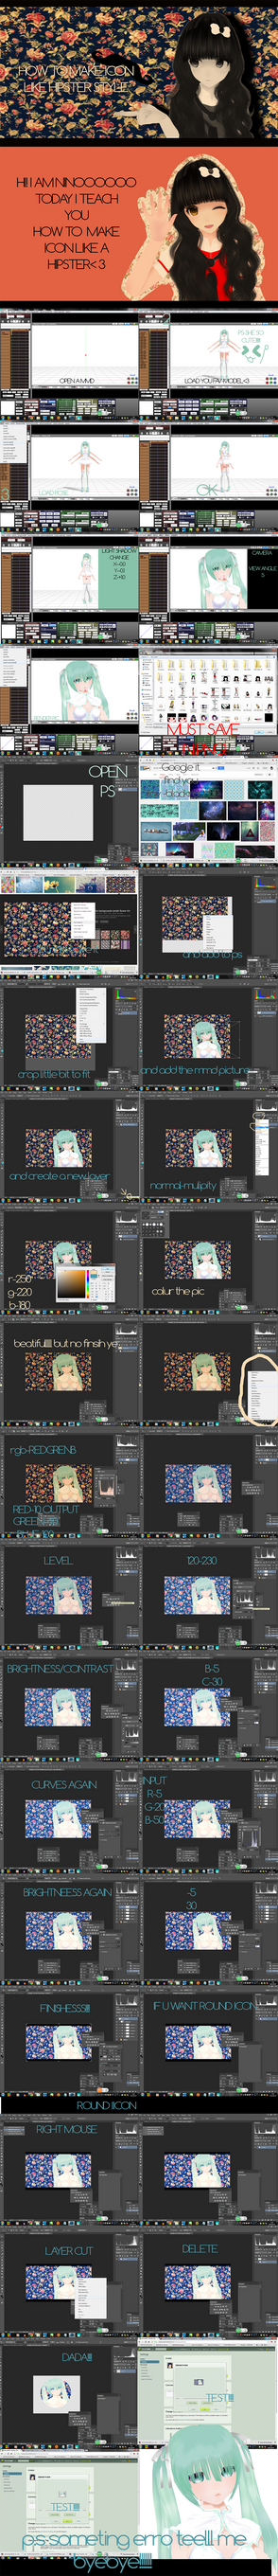 MMD #HOW TO MAKE ICON LIKE A HIPSTER STYLE